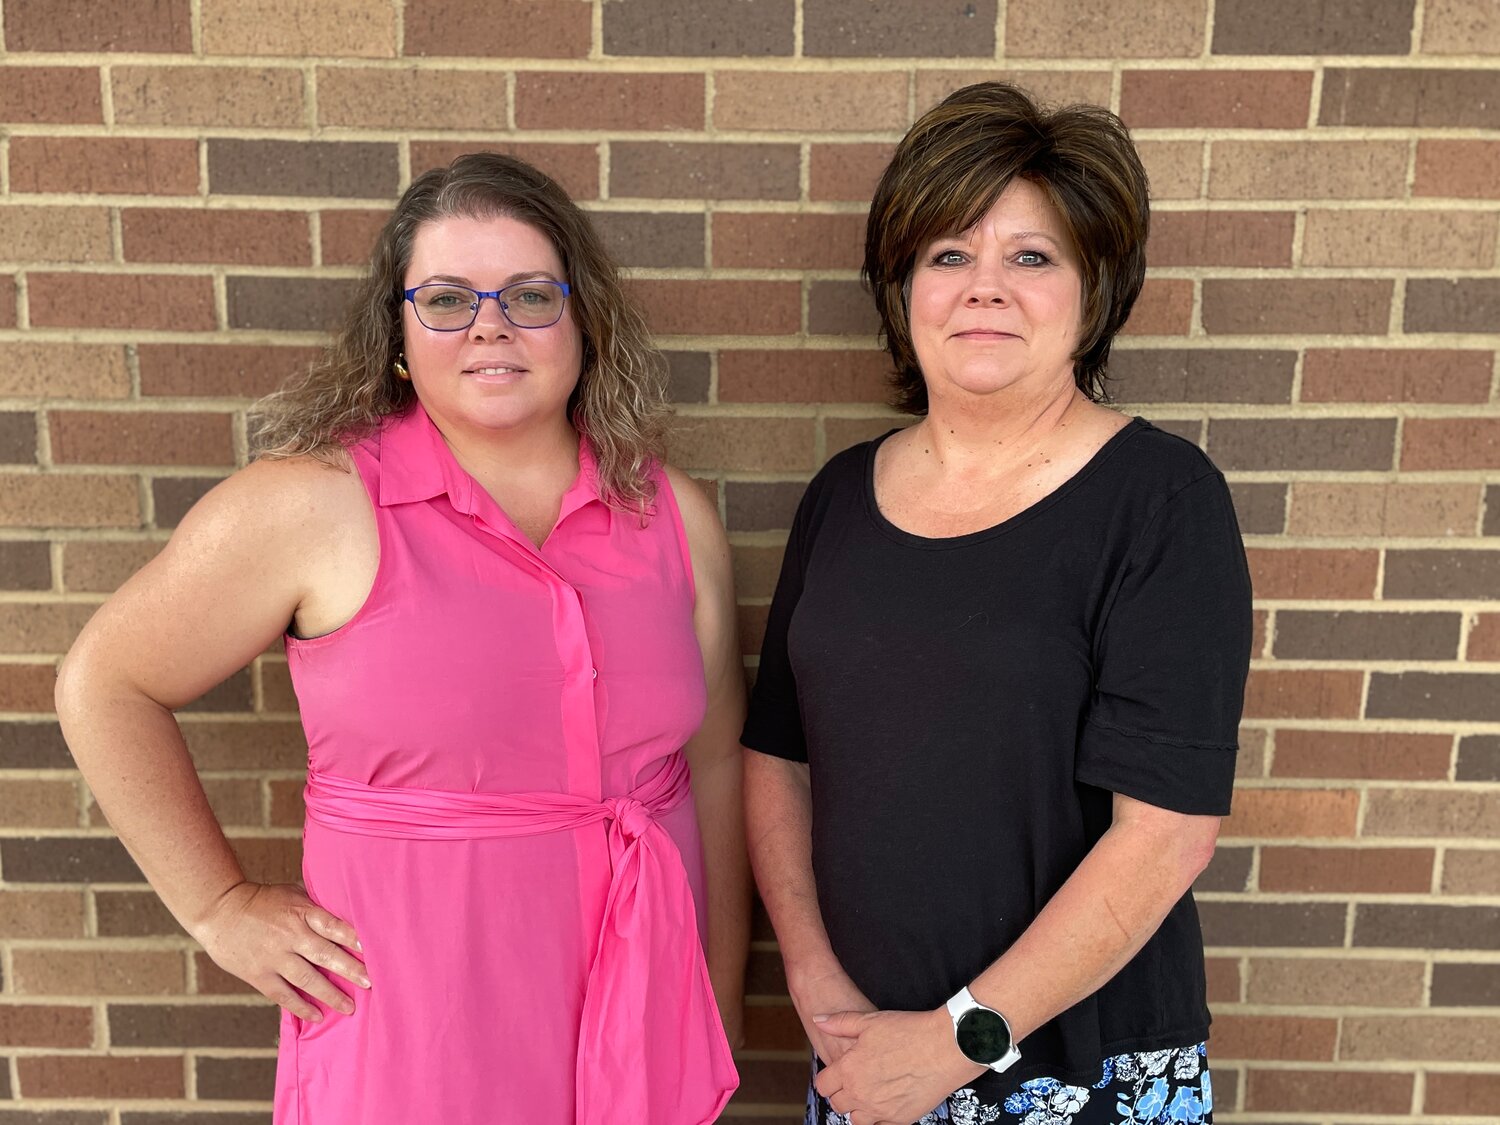 CCS Director of Nutrition Services Jennifer Ozkurt (left) and School Nutrition Operations Coordinator Renee Langley (right) joined fewer than 1,600 school nutrition colleagues across the country who have achieved this nationally recognized designation. Photo by John Wood